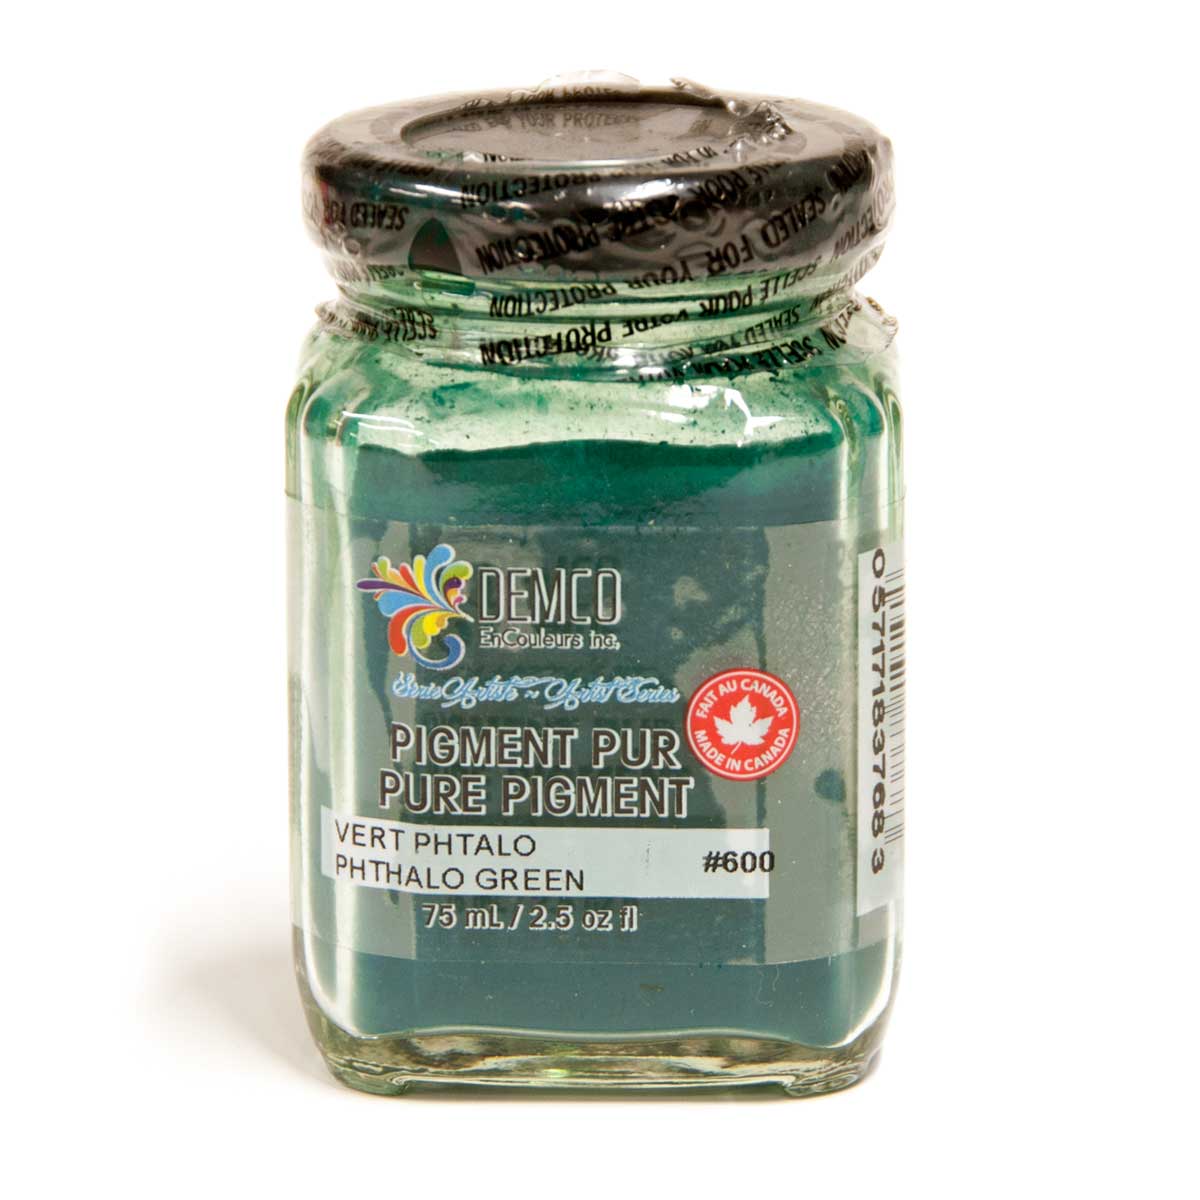 Demco Pure Pigment Artist Series 2 - Phthalo Green 75 ml